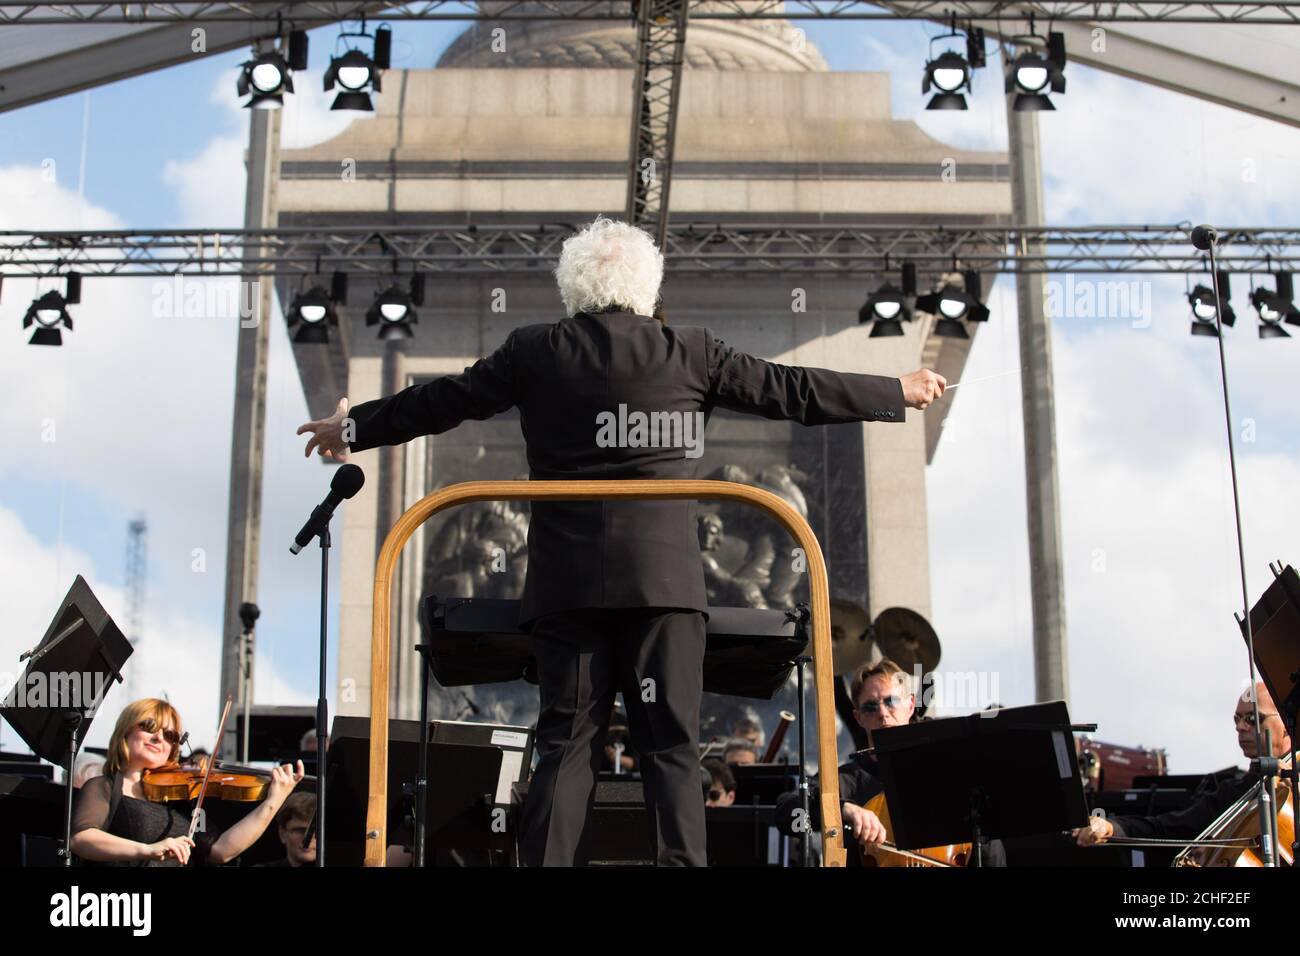 Sir Simon Rattle conducts the London Symphony Orchestra with musicians aged 8 to 18 from the Guildhall School of Music & Drama and young musicians from the LSO On Track programme at the BMW Classic event in Trafalgar Square London. Stock Photo